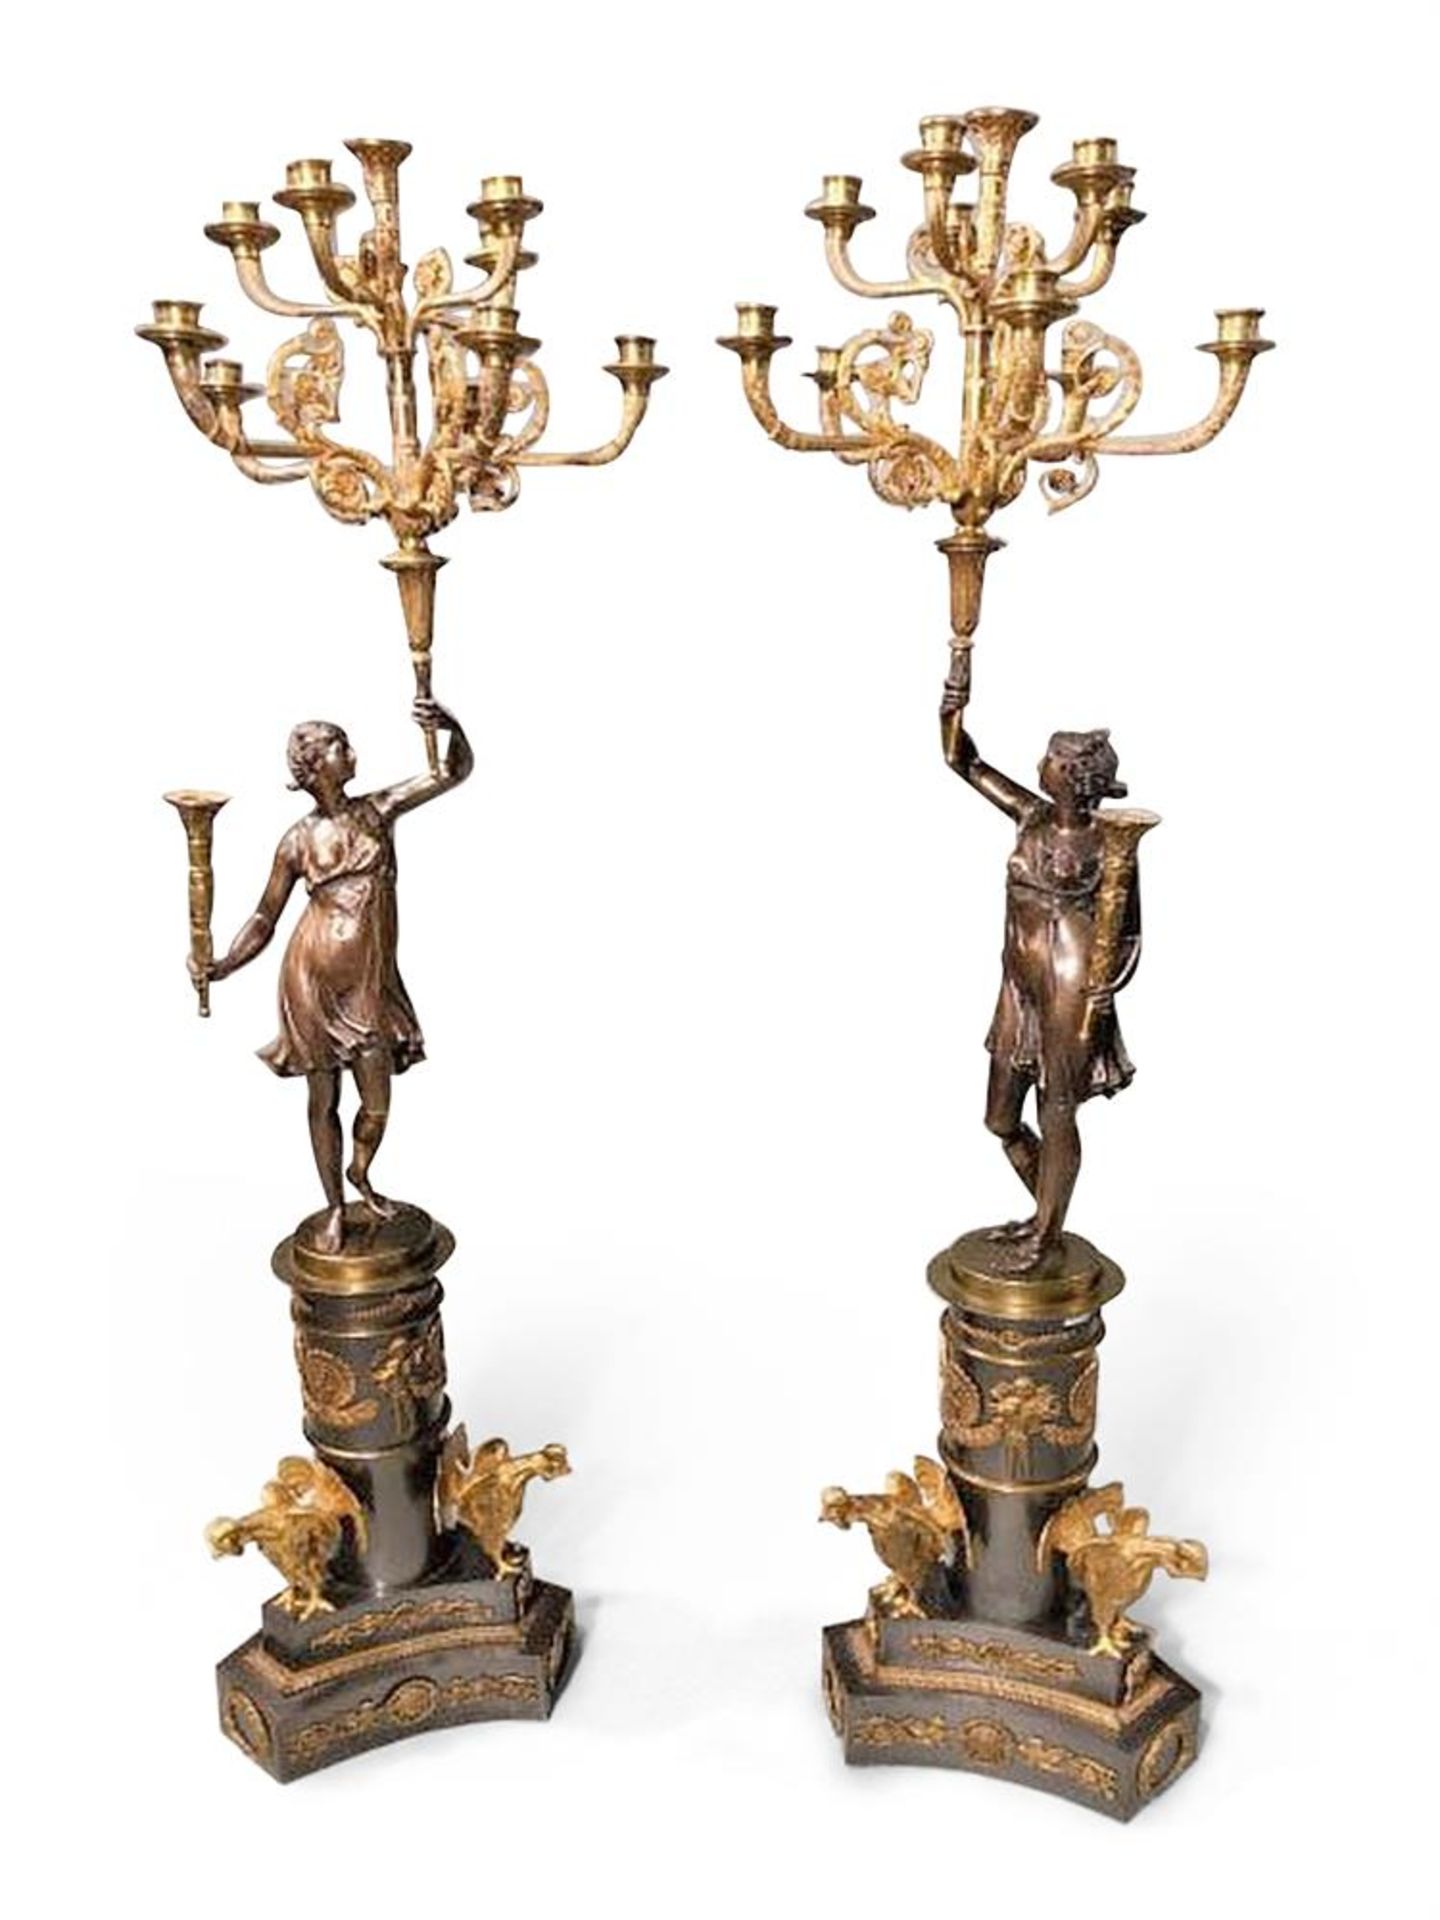 A LARGE PAIR OF BRONZE AND GILT BRONZE CANDELABRA, LATE 19TH CENTURY